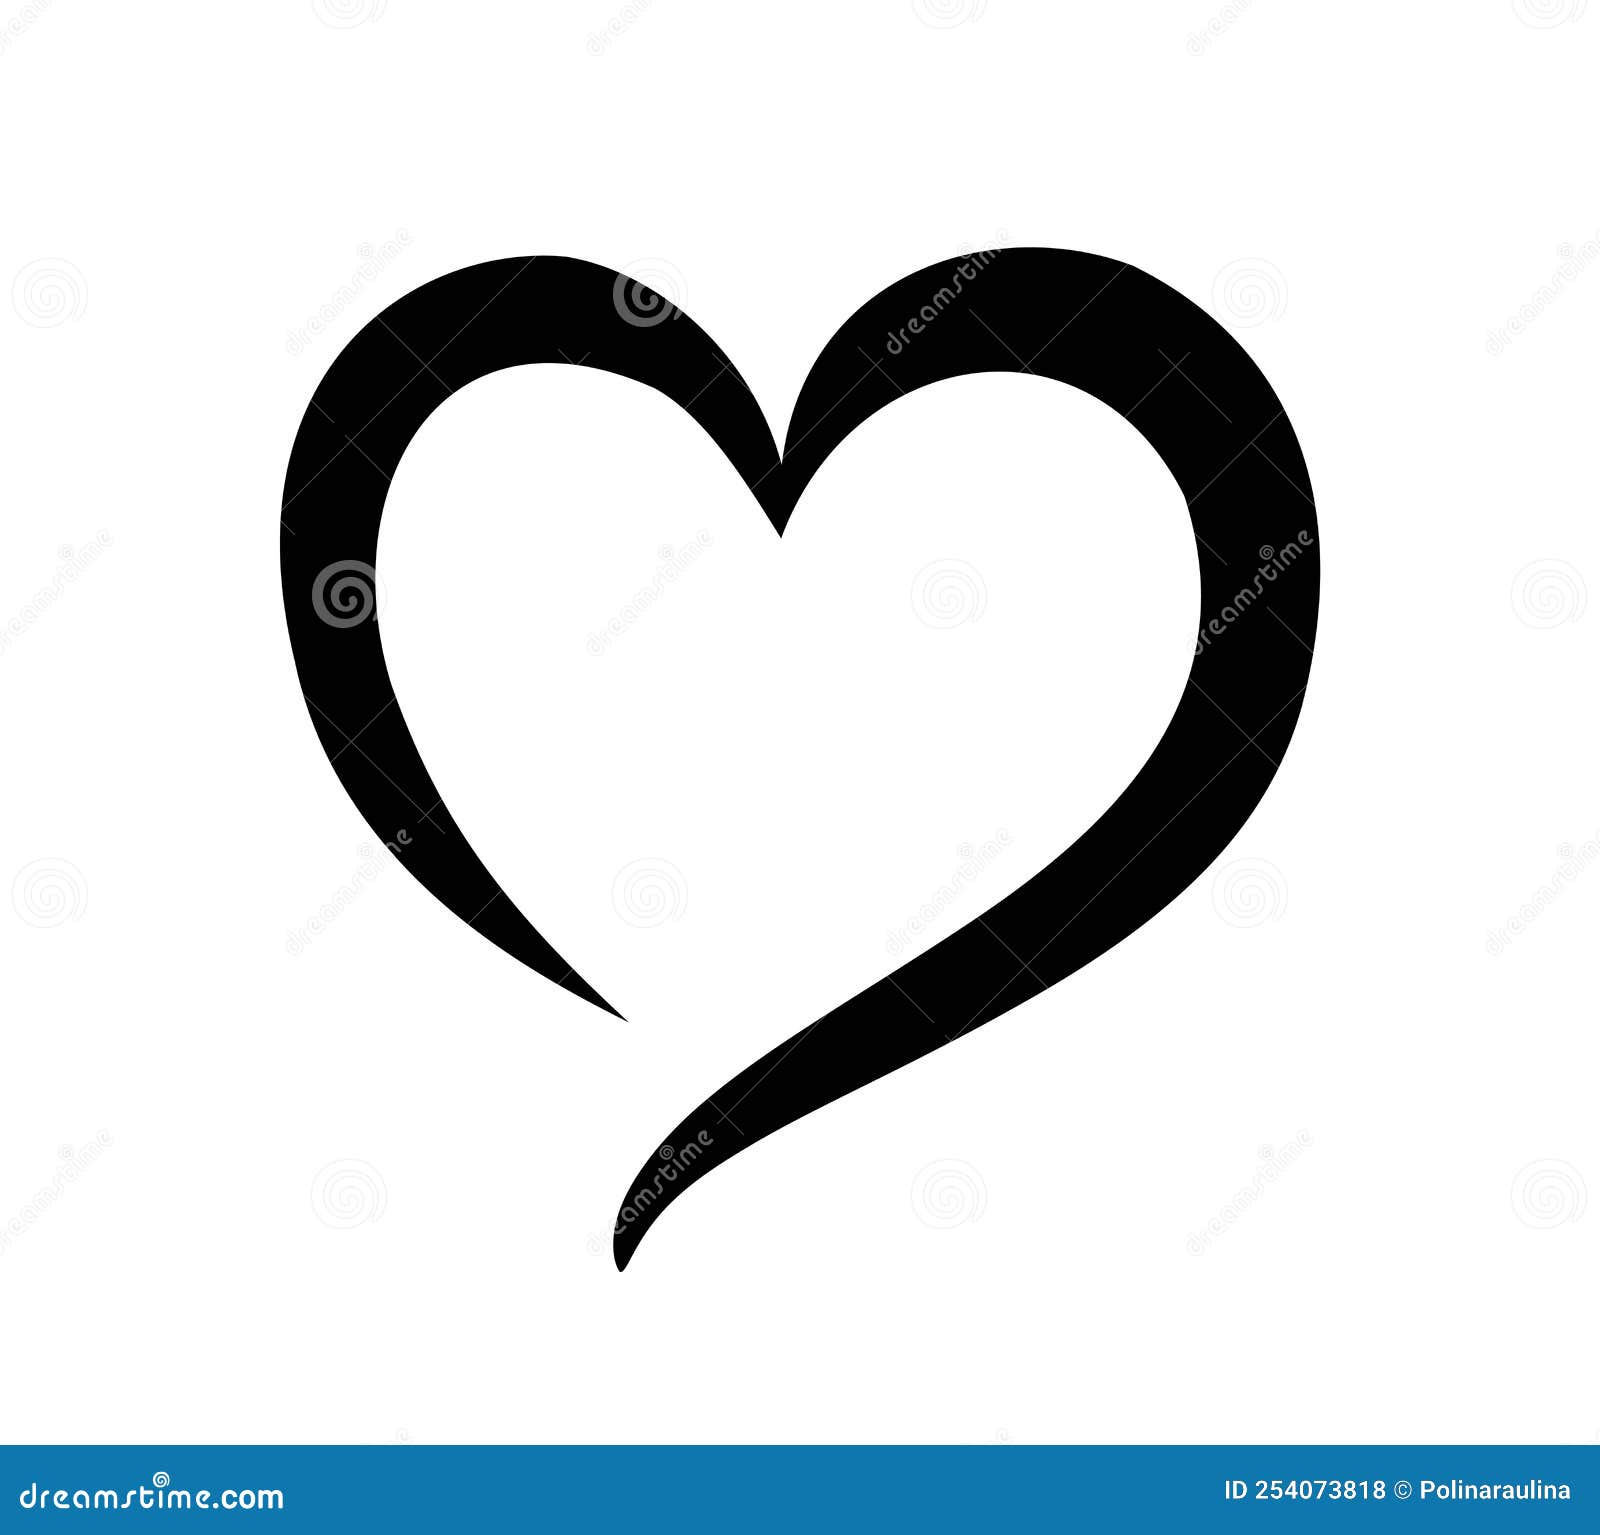 Premium Vector  Abstract burning heart tattoo silhouette outline graphic  element of cracked love symbol